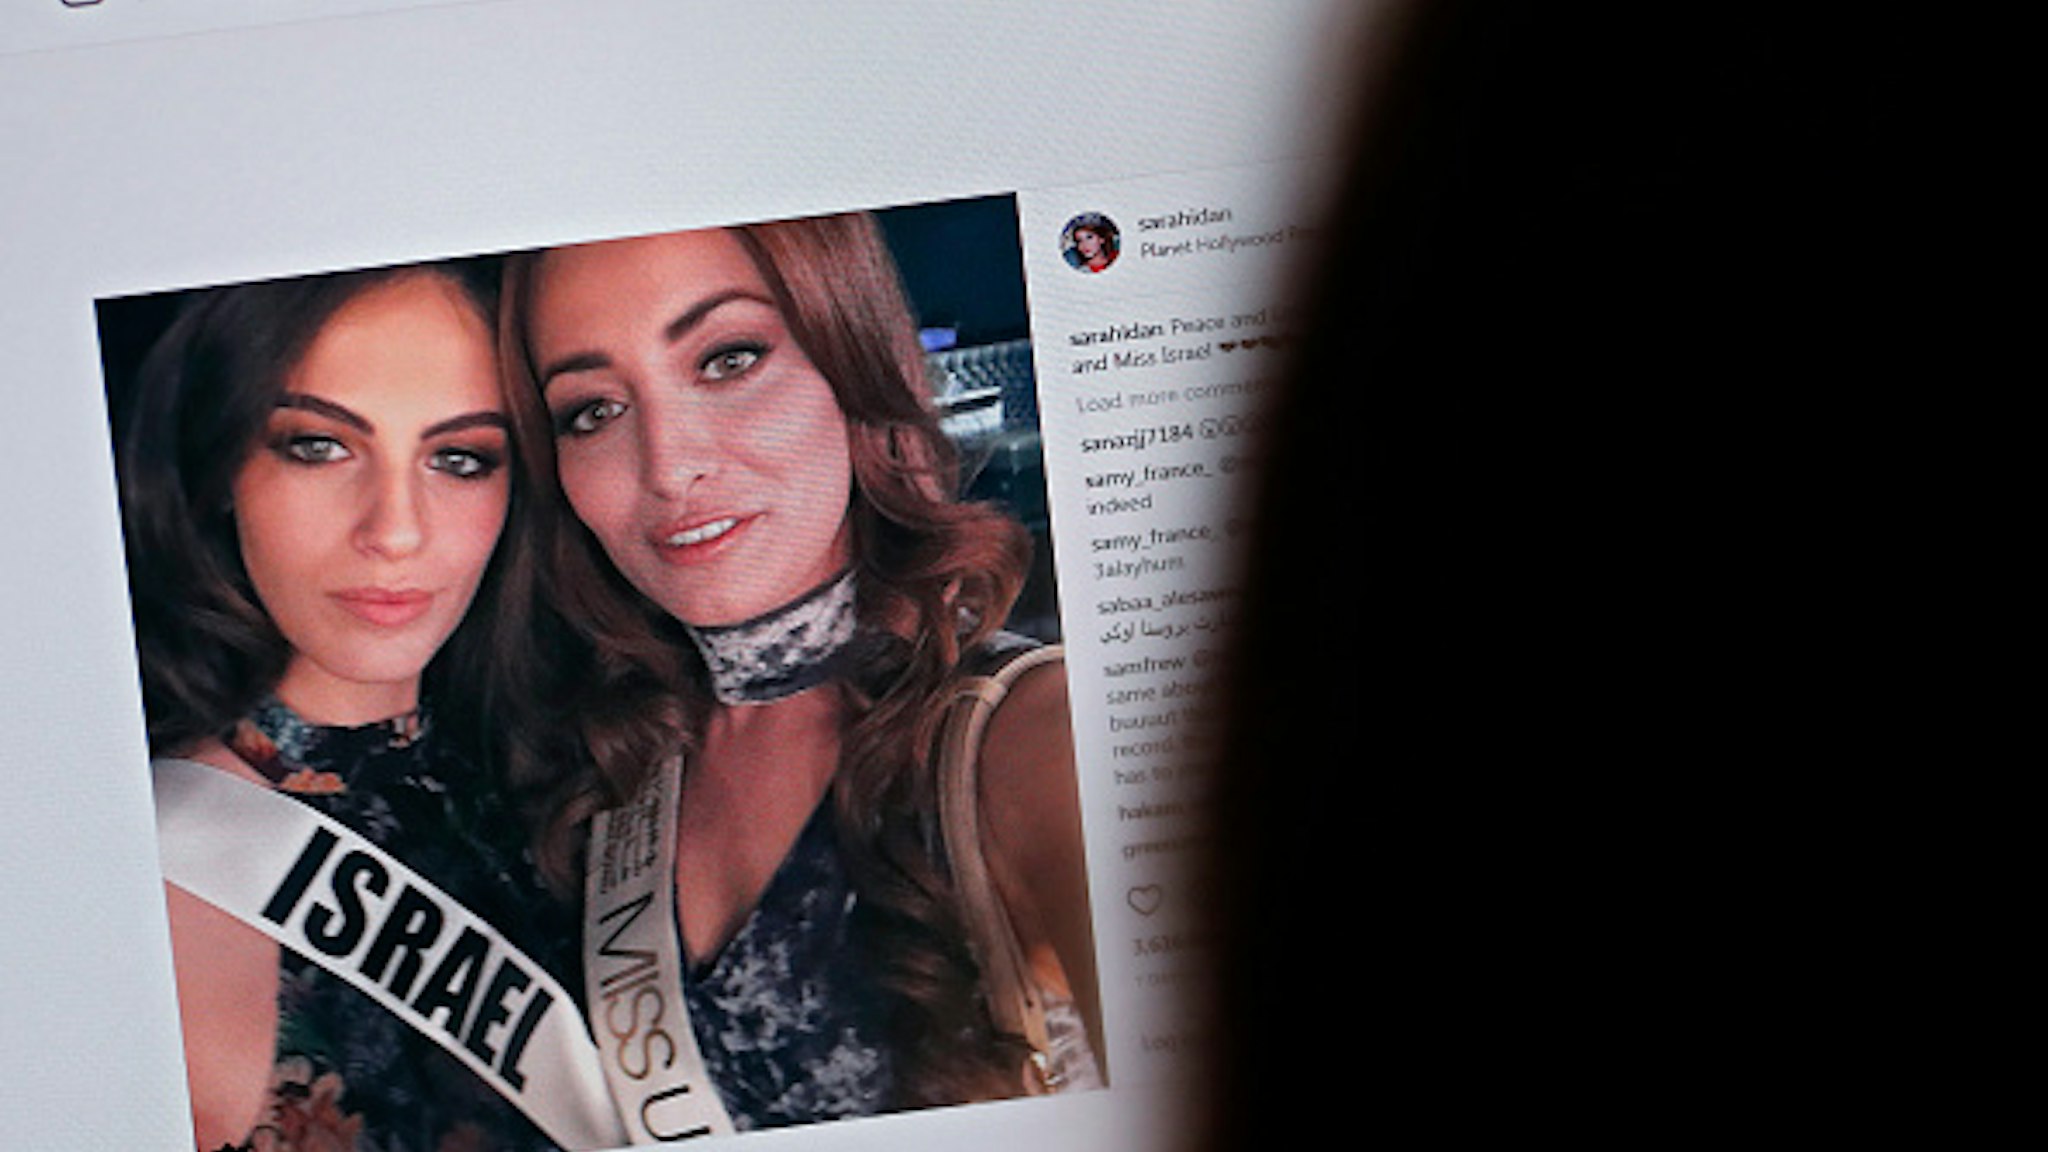 A picture taken on November 21, 2017 shows a picture posted by the Instagram profile of Sarah Idan on November 14, who holds the titles of "Miss Iraq USA 2016" and "Miss Iraq Universe 2017", as she is seen taking a "selfie" photograph with Adar Gandelsman, who holds the title of "Miss Universe Israel 2017", with a caption reading: "Peace and Love from Miss Iraq and Miss Israel #missuniverse". The post has been "liked" over 3,600 times since it was first uploaded but it also triggered an avalanche of comments, some positive and others negative in Iraq, which does not recognize the Jewish state and is still technically in a state of war with it. Both contestants defended the post saying they wanted to share a message of peace. / AFP PHOTO / THOMAS COEX / RESTRICTED TO EDITORIAL USE - MANDATORY MENTION OF THE ARTIST UPON PUBLICATION - TO ILLUSTRATE THE EVENT AS SPECIFIED IN THE CAPTION